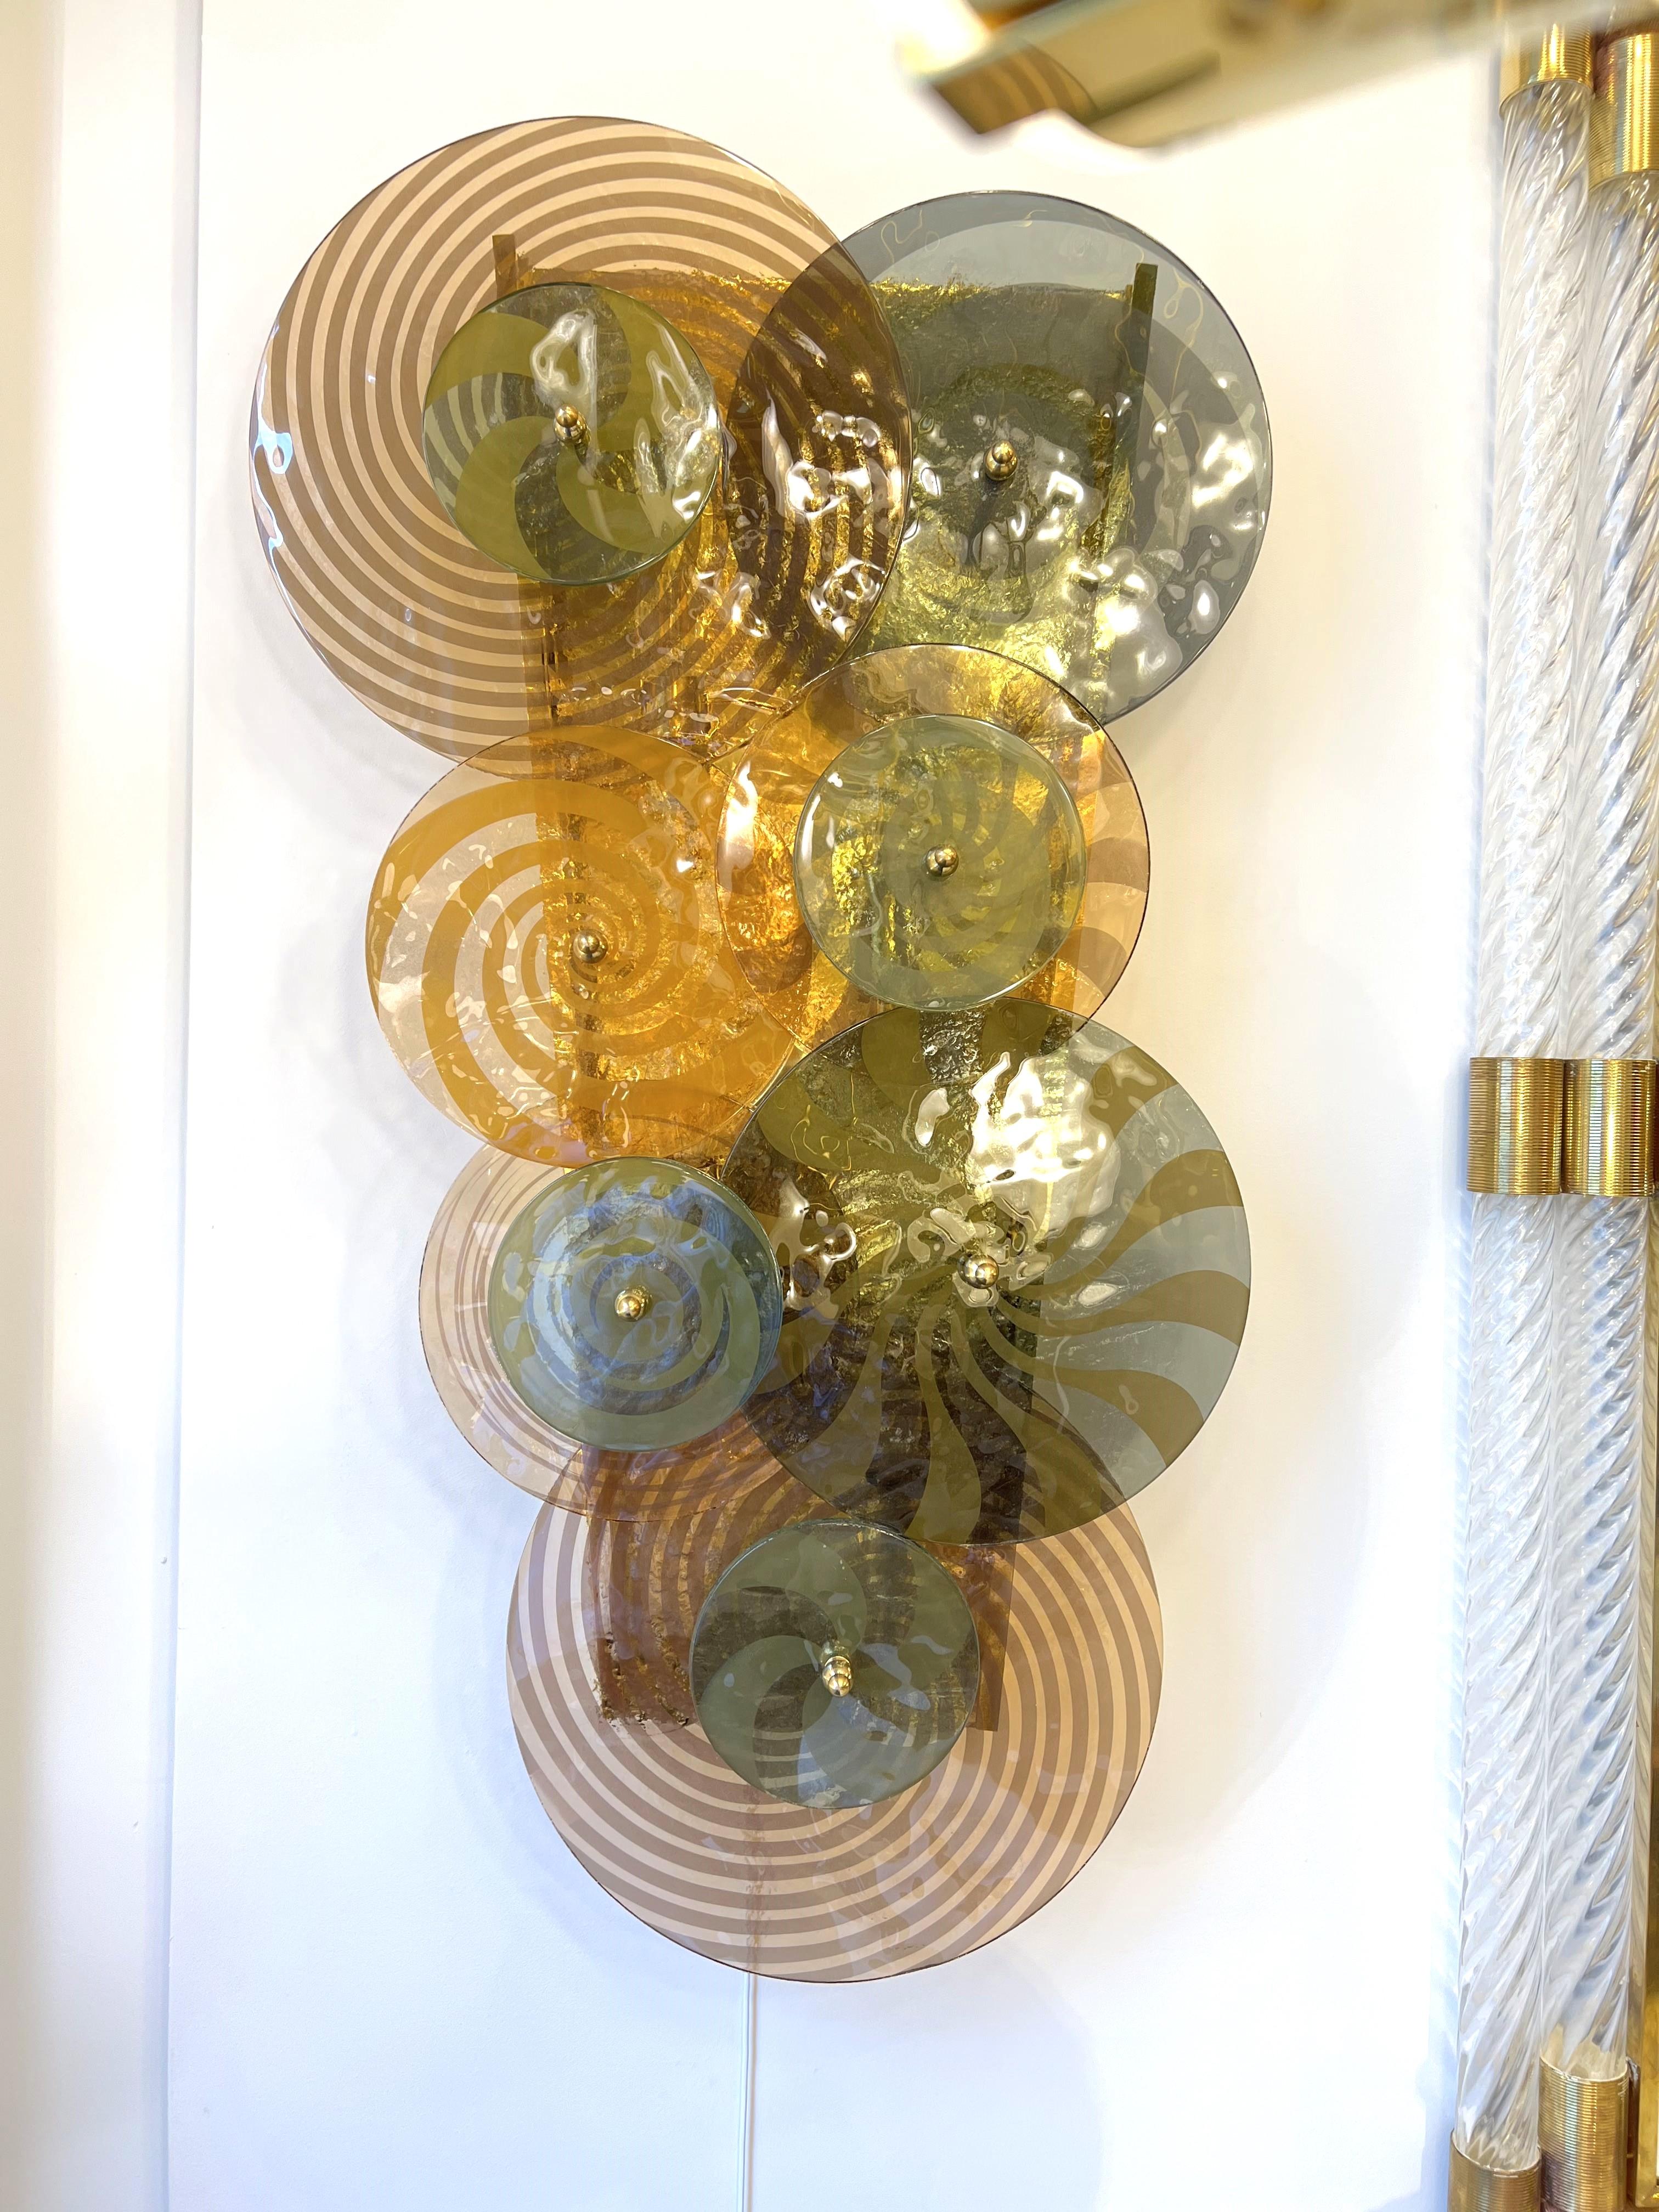 Rare and one-of-a-kind pair of Murano Glass Spiral Discs and Brass Sconces. Hand-casted Murano glass discs, both spiraled and ridged, in various diameters and in hues of sage green, smoked taupe, amber and muted blush pink adorn the front of these